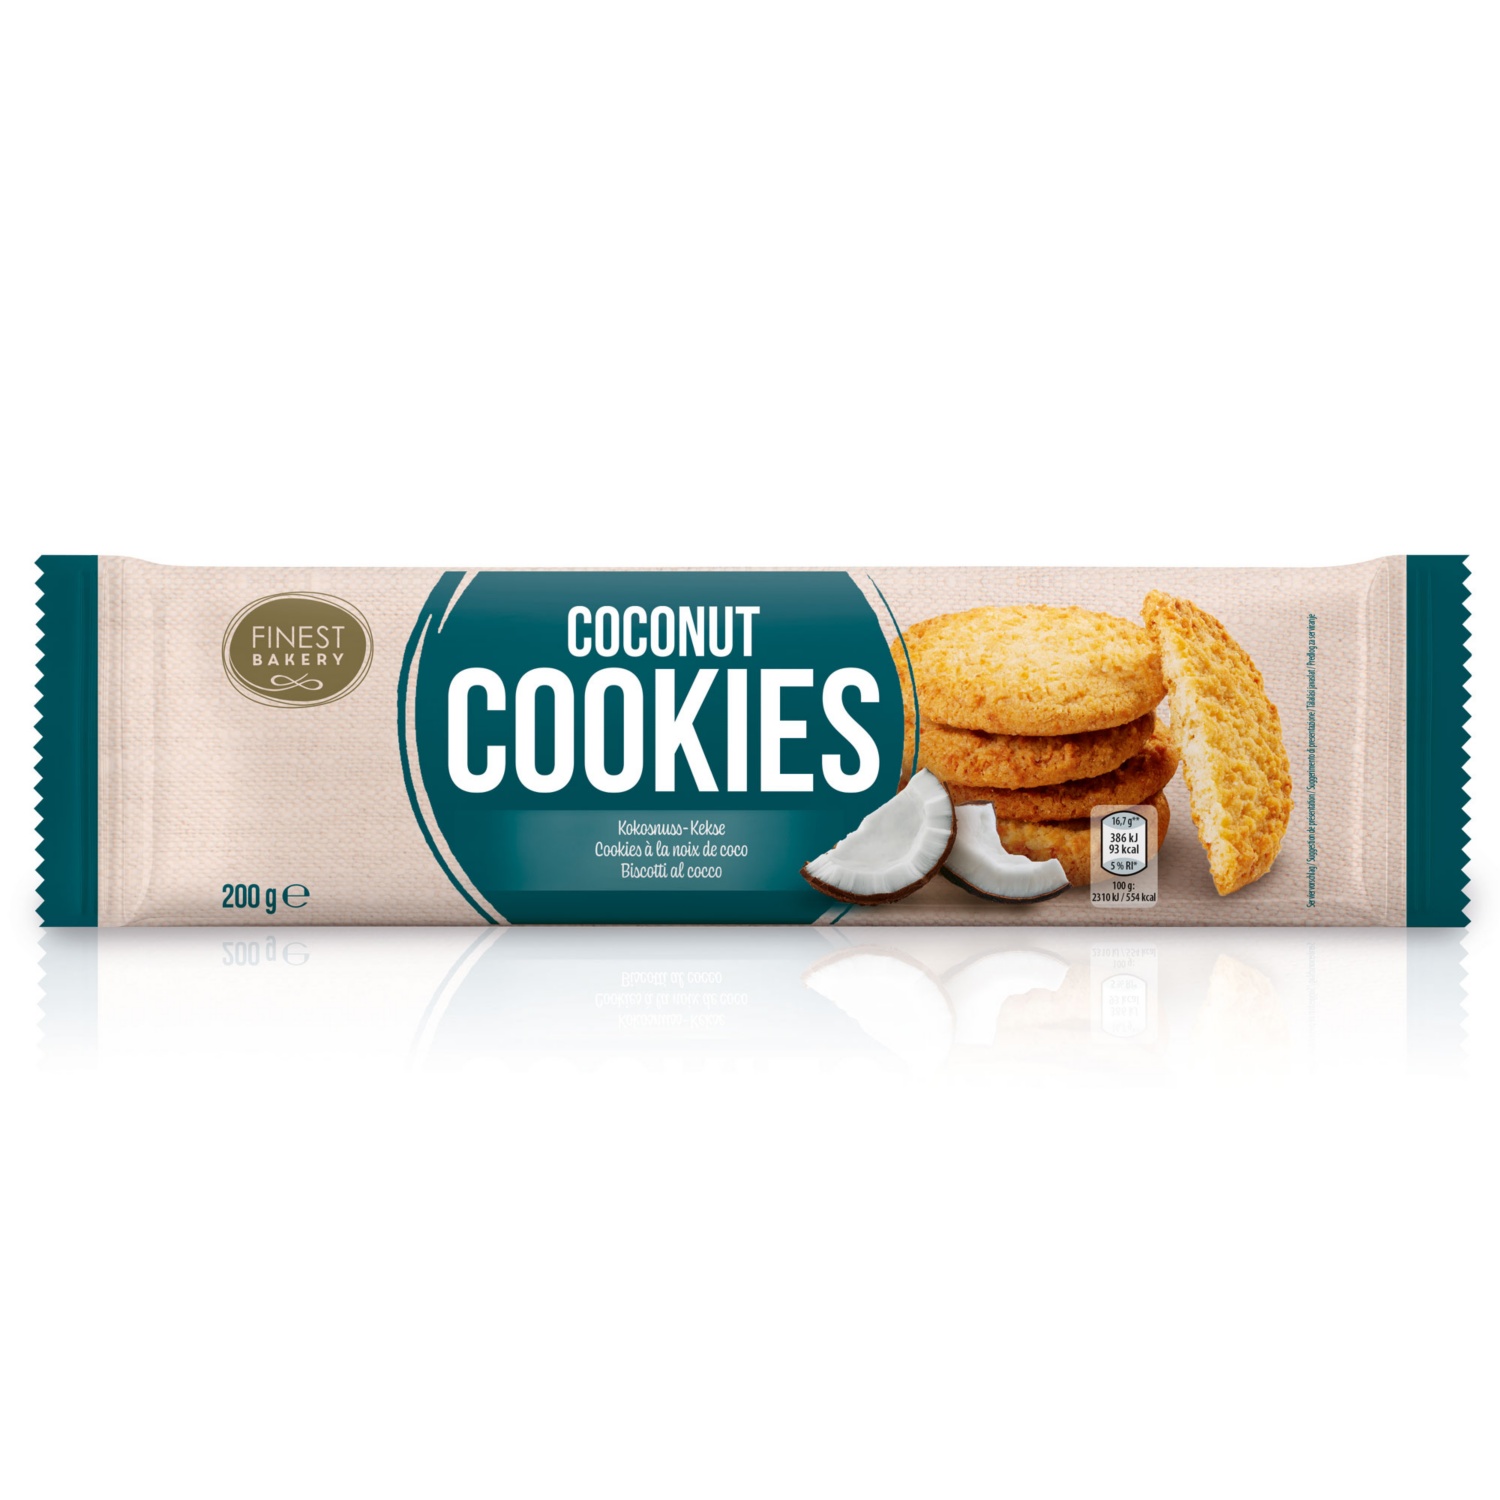 FINEST BAKERY Cookies al cocco